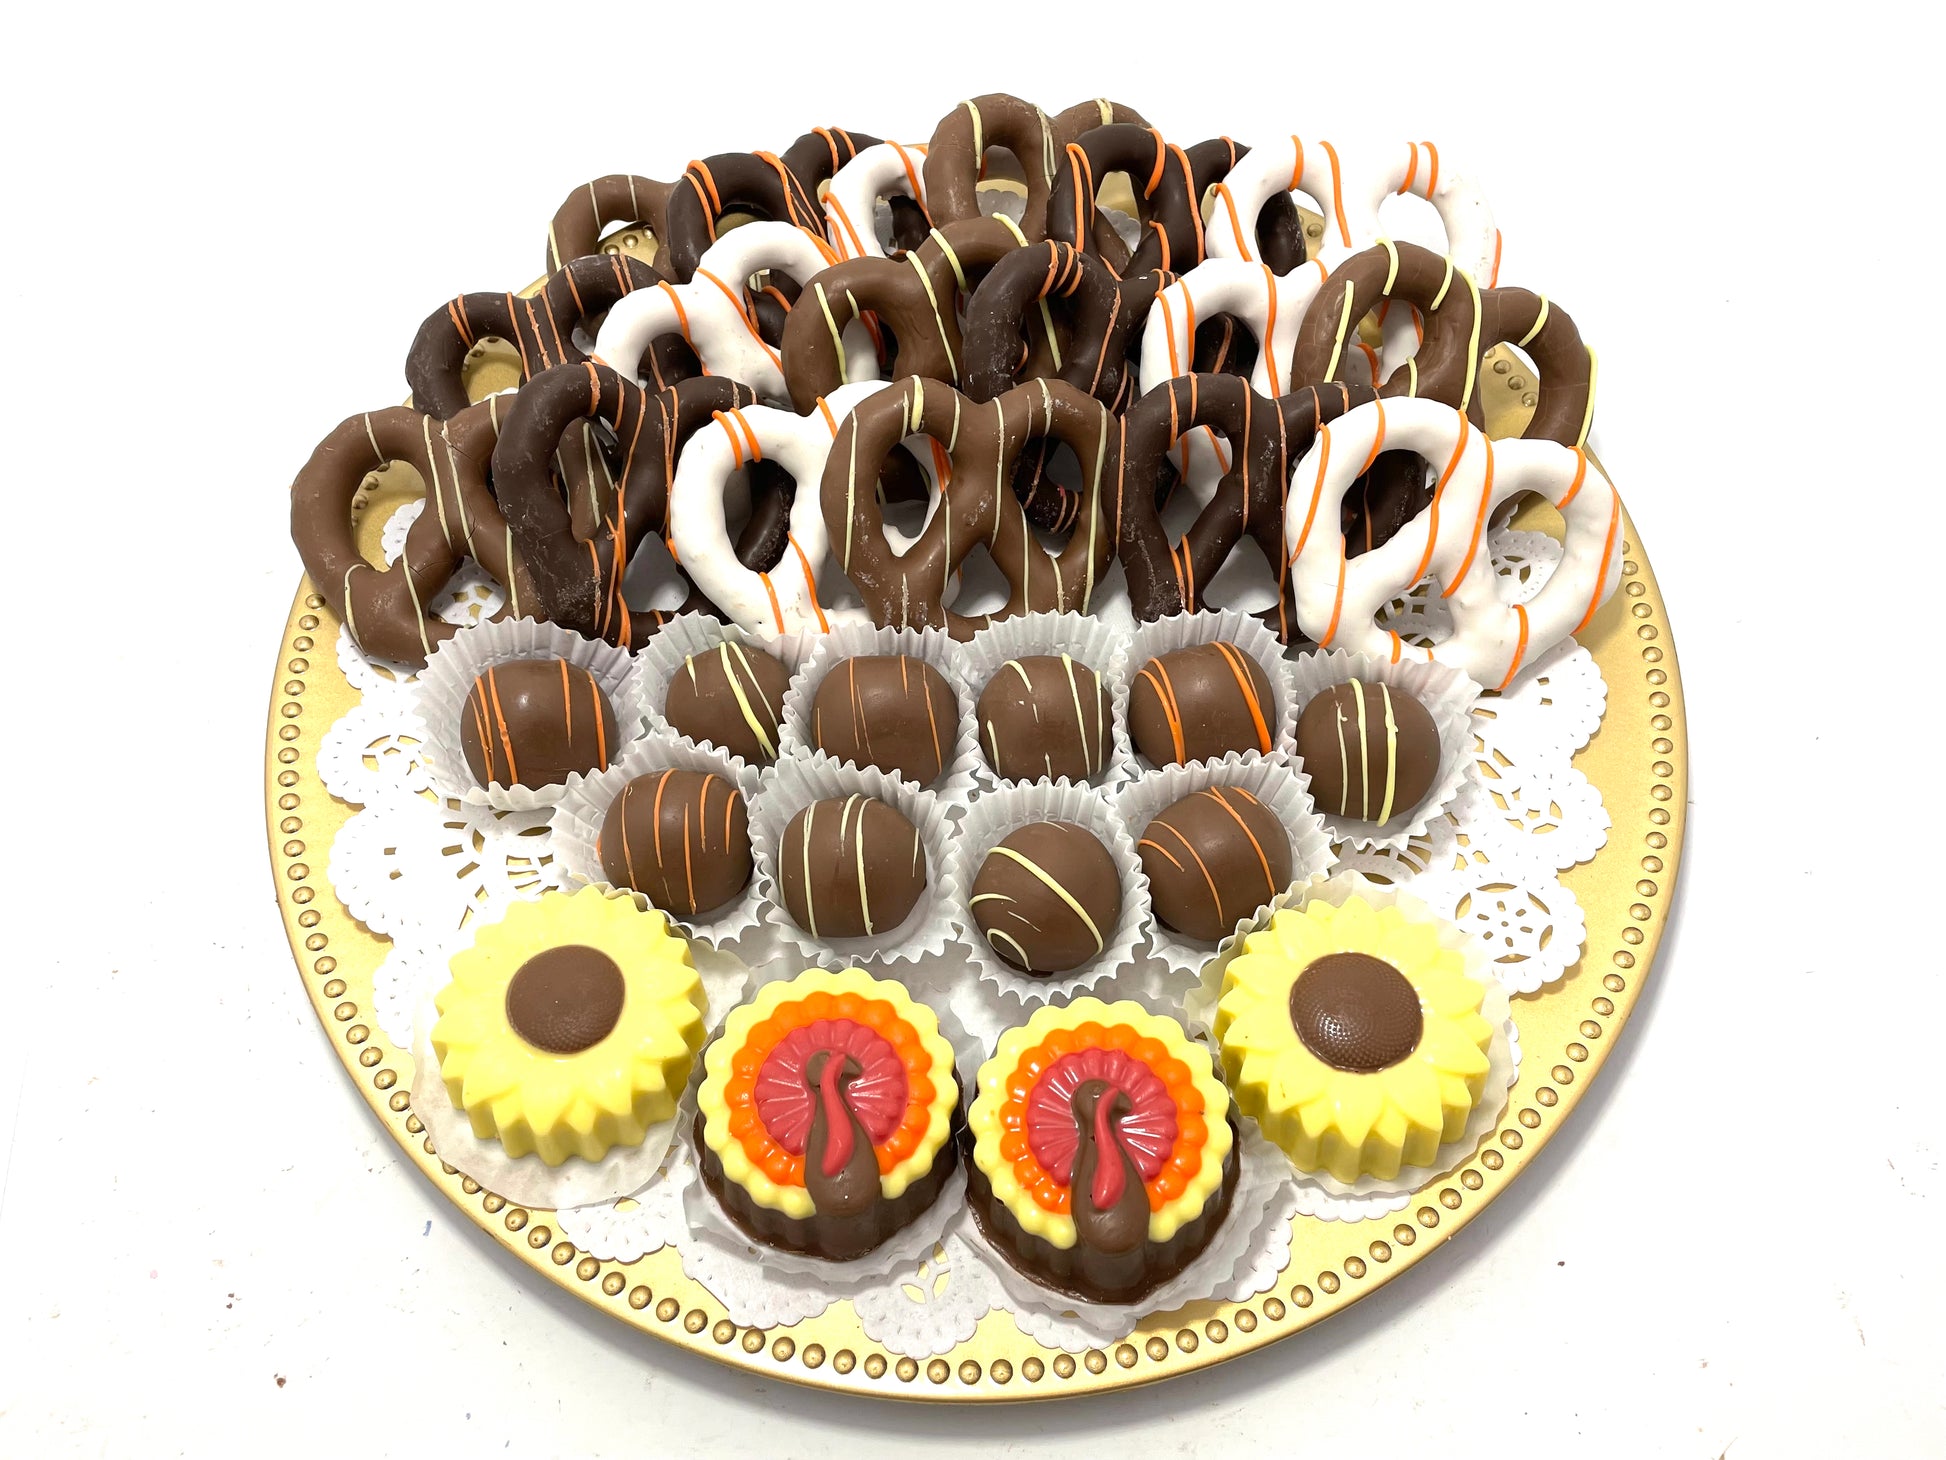 Large Fall Thanksgiving Mixed Chocolate Platter - The Dessert Ladies